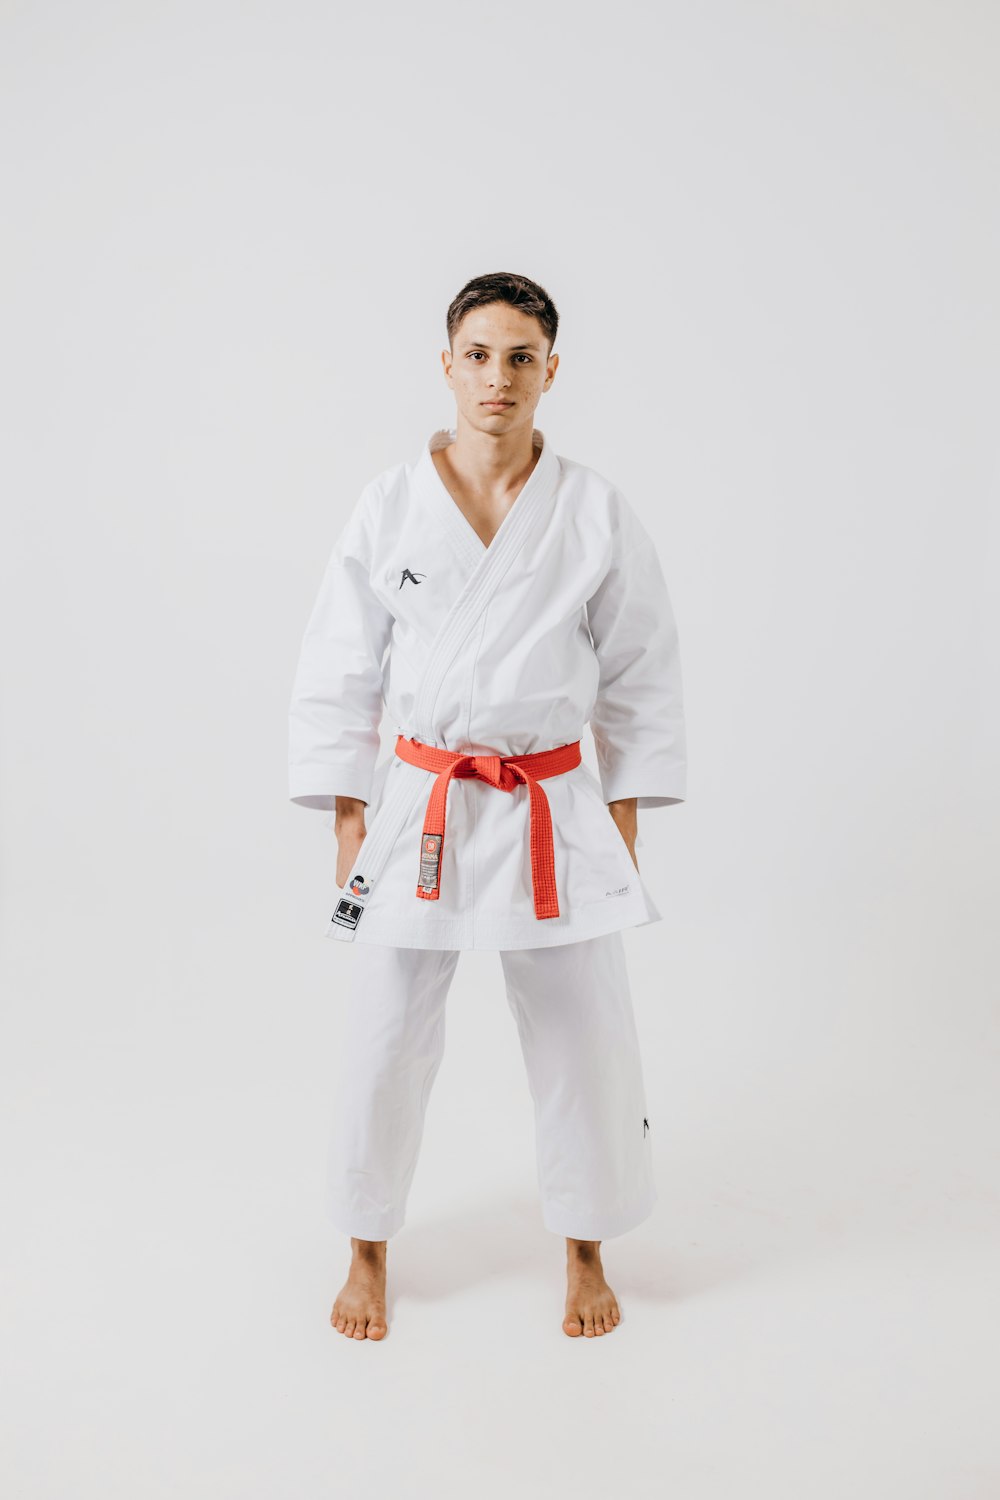 a man standing in a white karate outfit